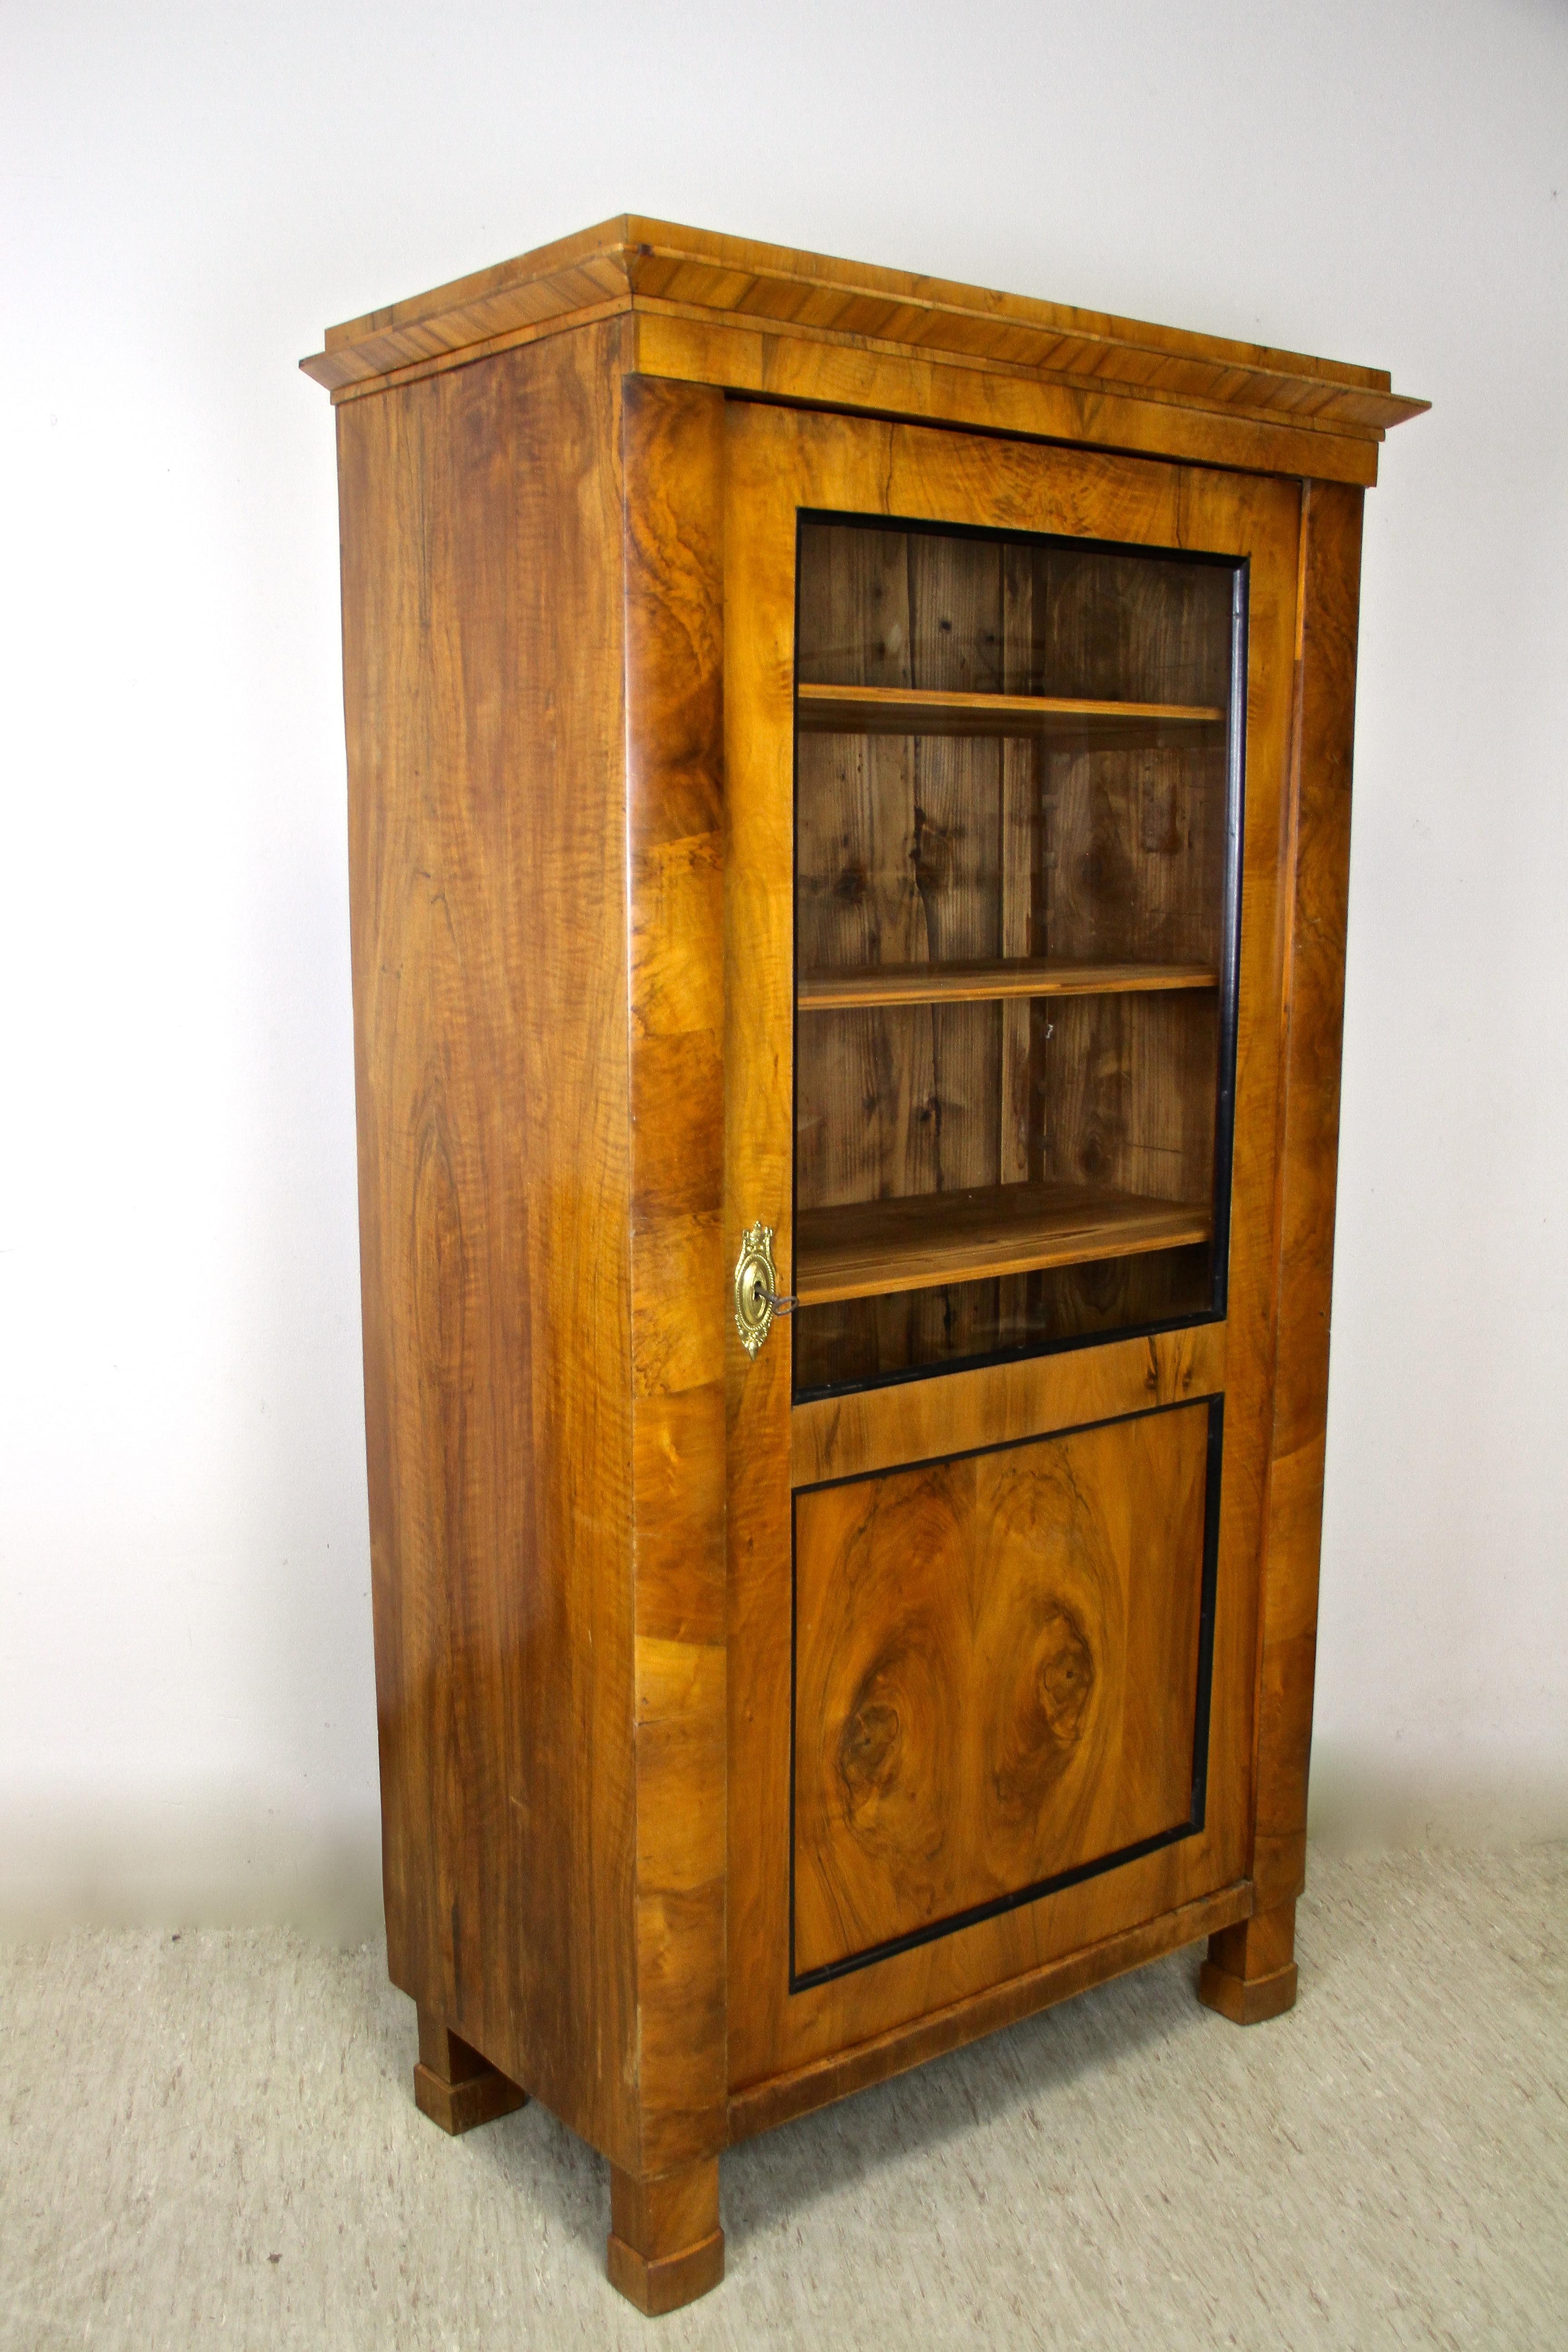 Lovely Biedermeier vitrine/ display cabinet from the renown period in Austria around 1840. A pleasant nutwood veneered 19th century cabinet with a perfect size - not too big and not too small. The door shows a big glass plate framed by ebonized bars